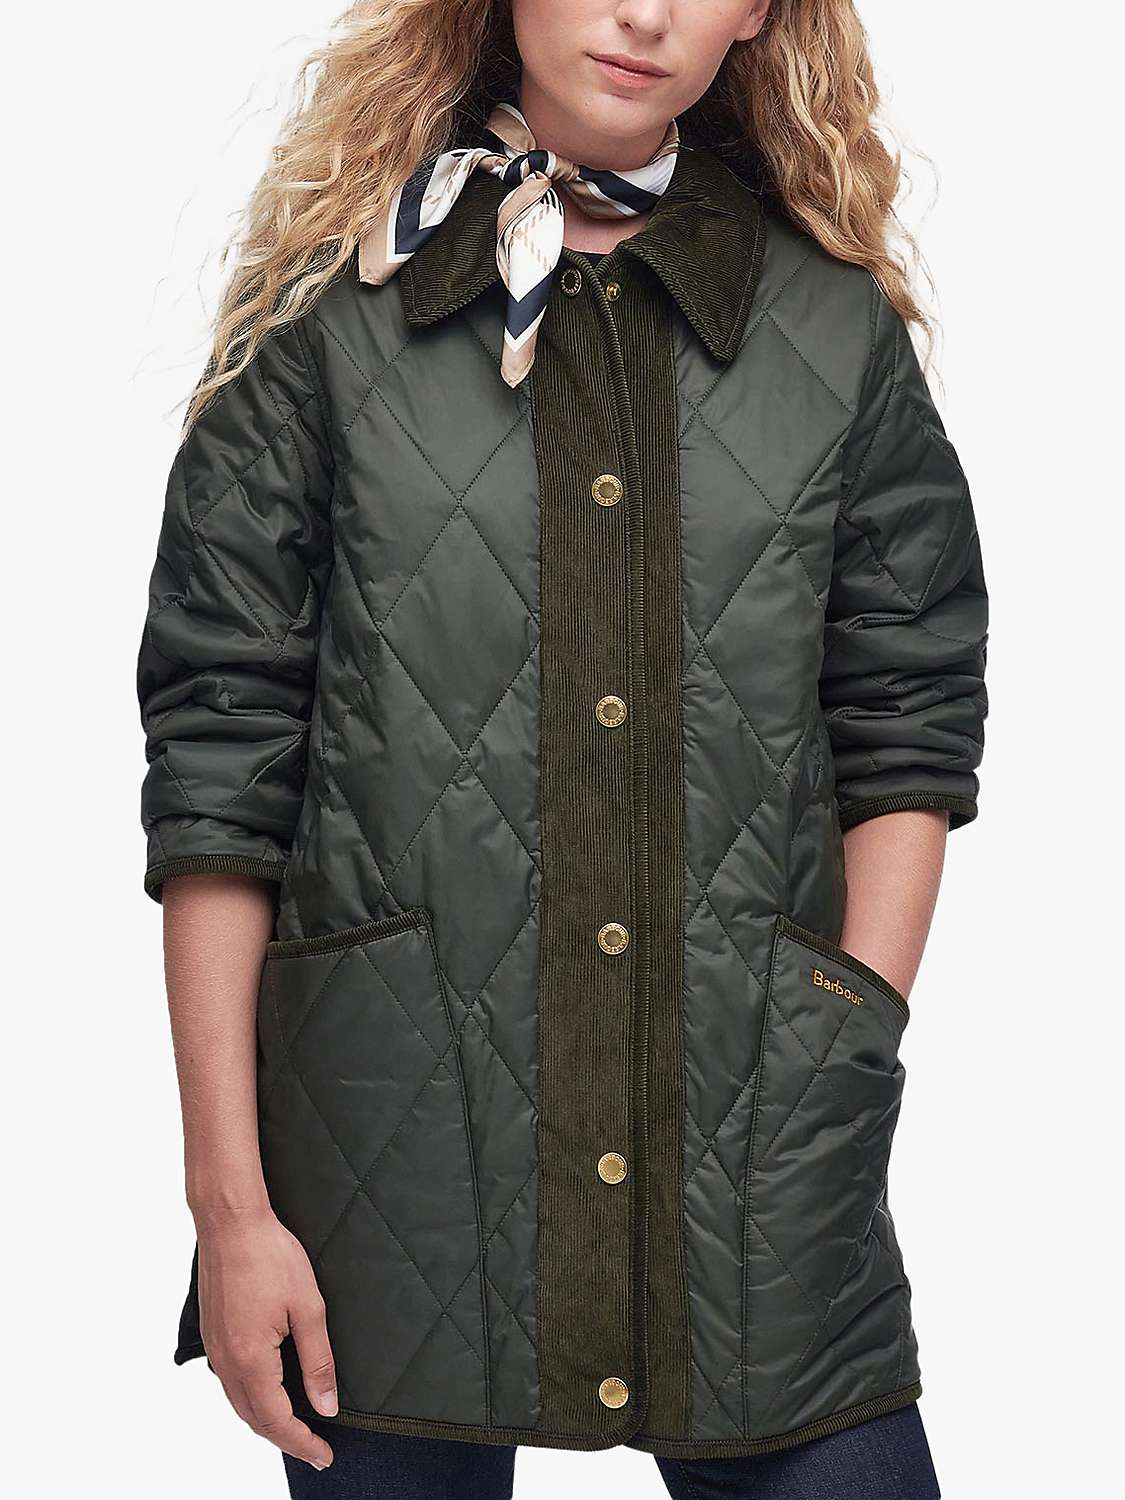 Buy Barbour Highcliffe Quilted Jacket Online at johnlewis.com